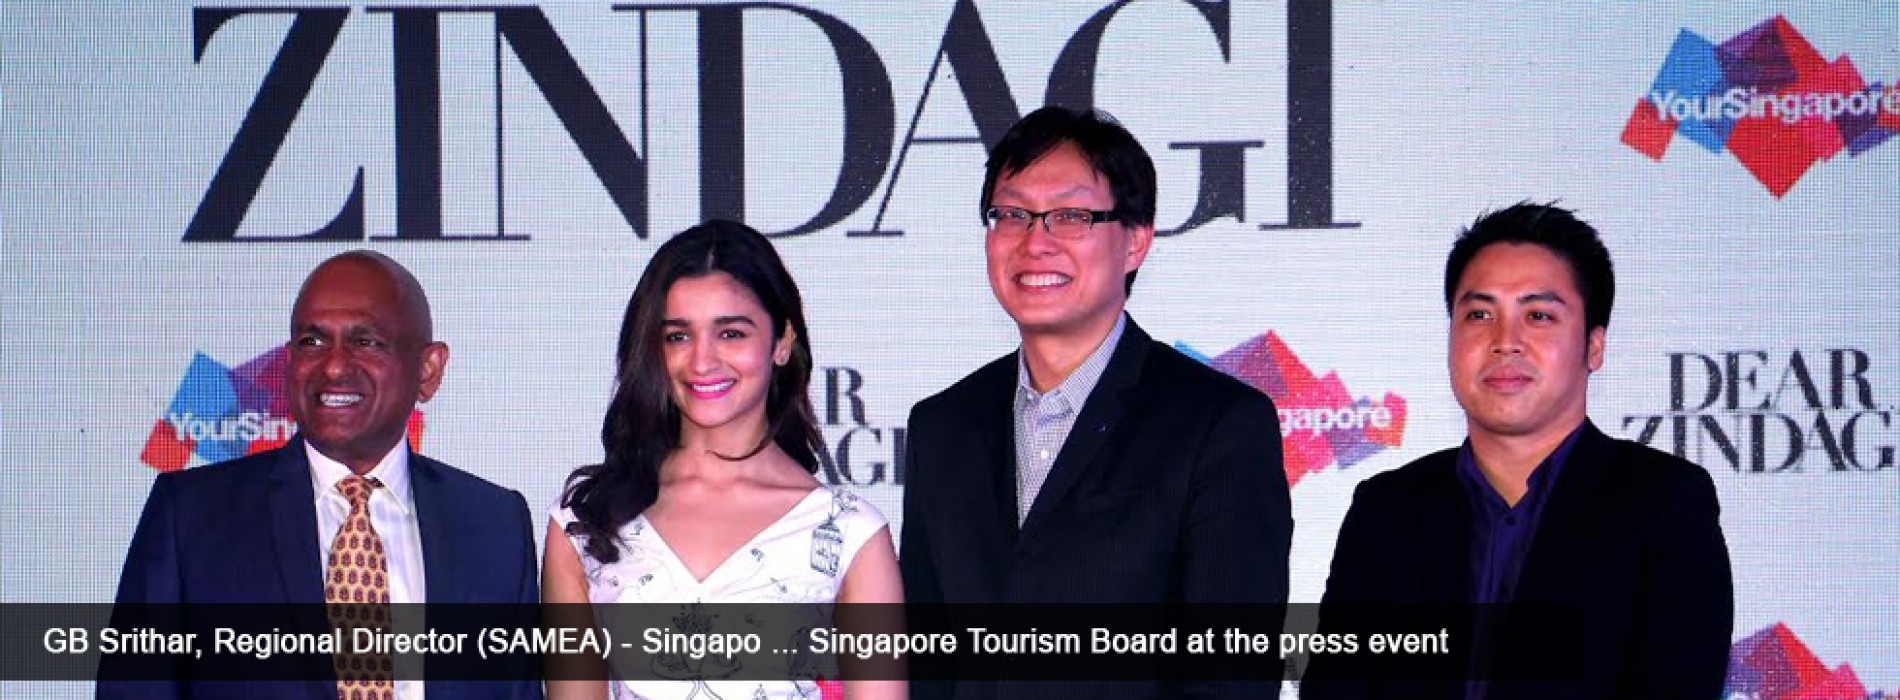 Magical moments in Singapore for cast of Dear Zindagi